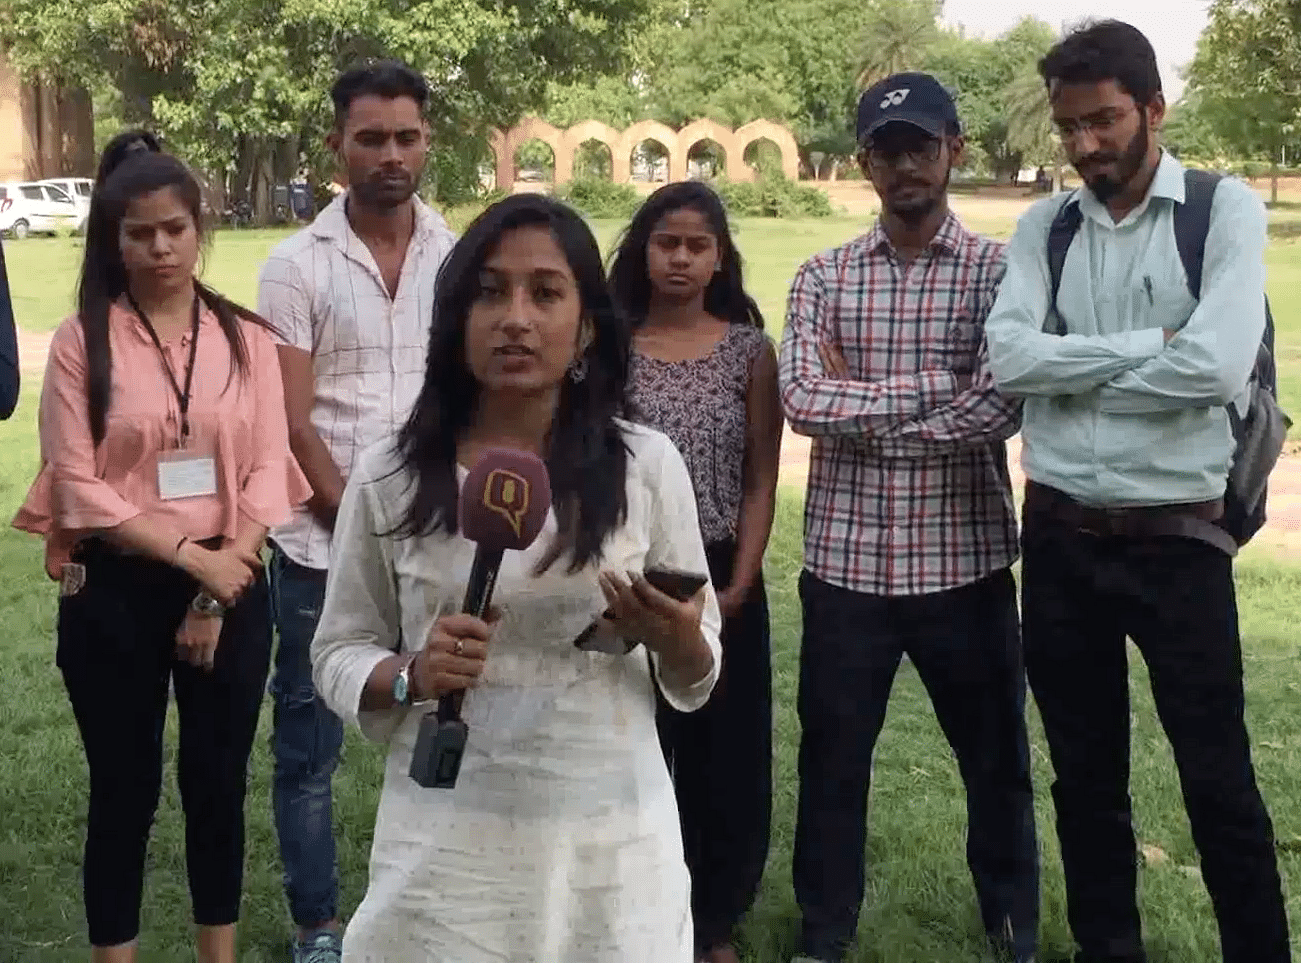 The Quint‘s 2019 Lok Sabha election coverage reaches Haryana where we ask young men and women about their issues and their expectations from the next government